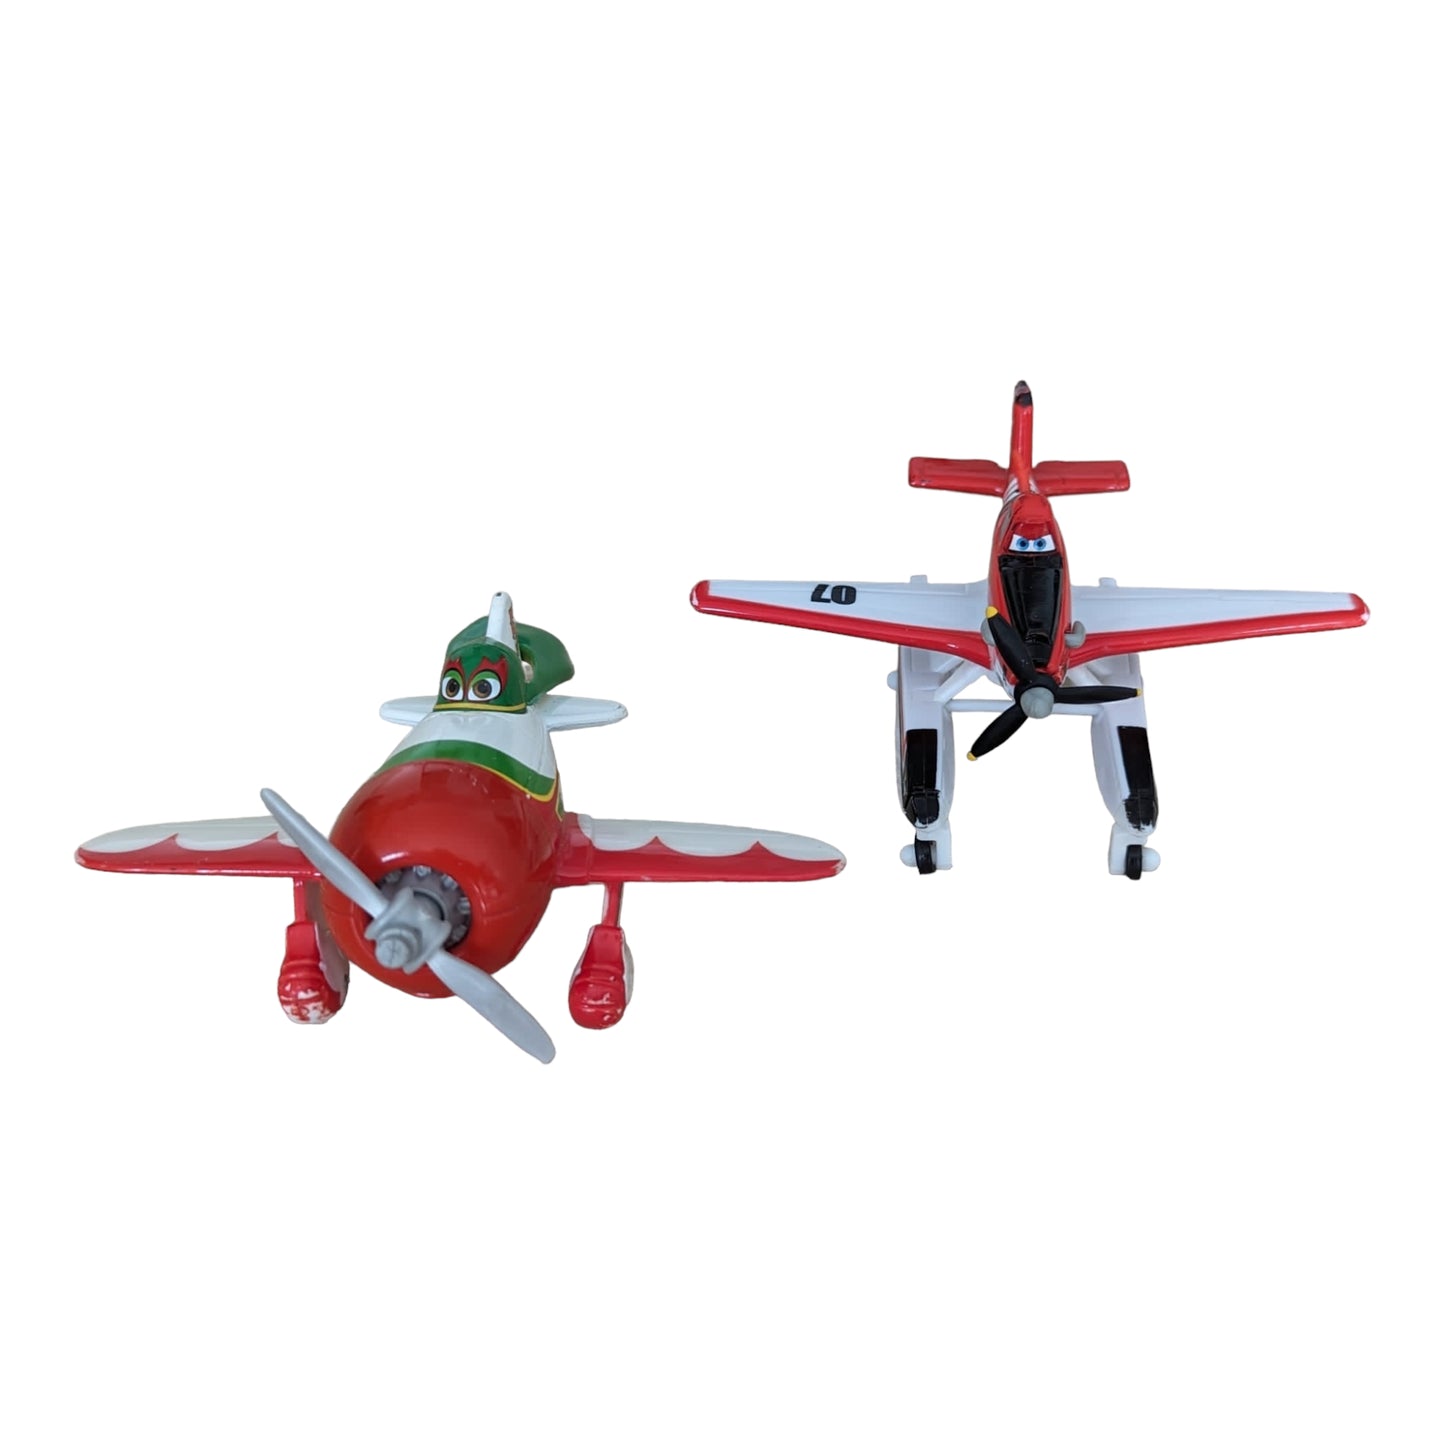 Diecast Disney Planes Models 10 cm - Chupacabra and Firefighter Dusty